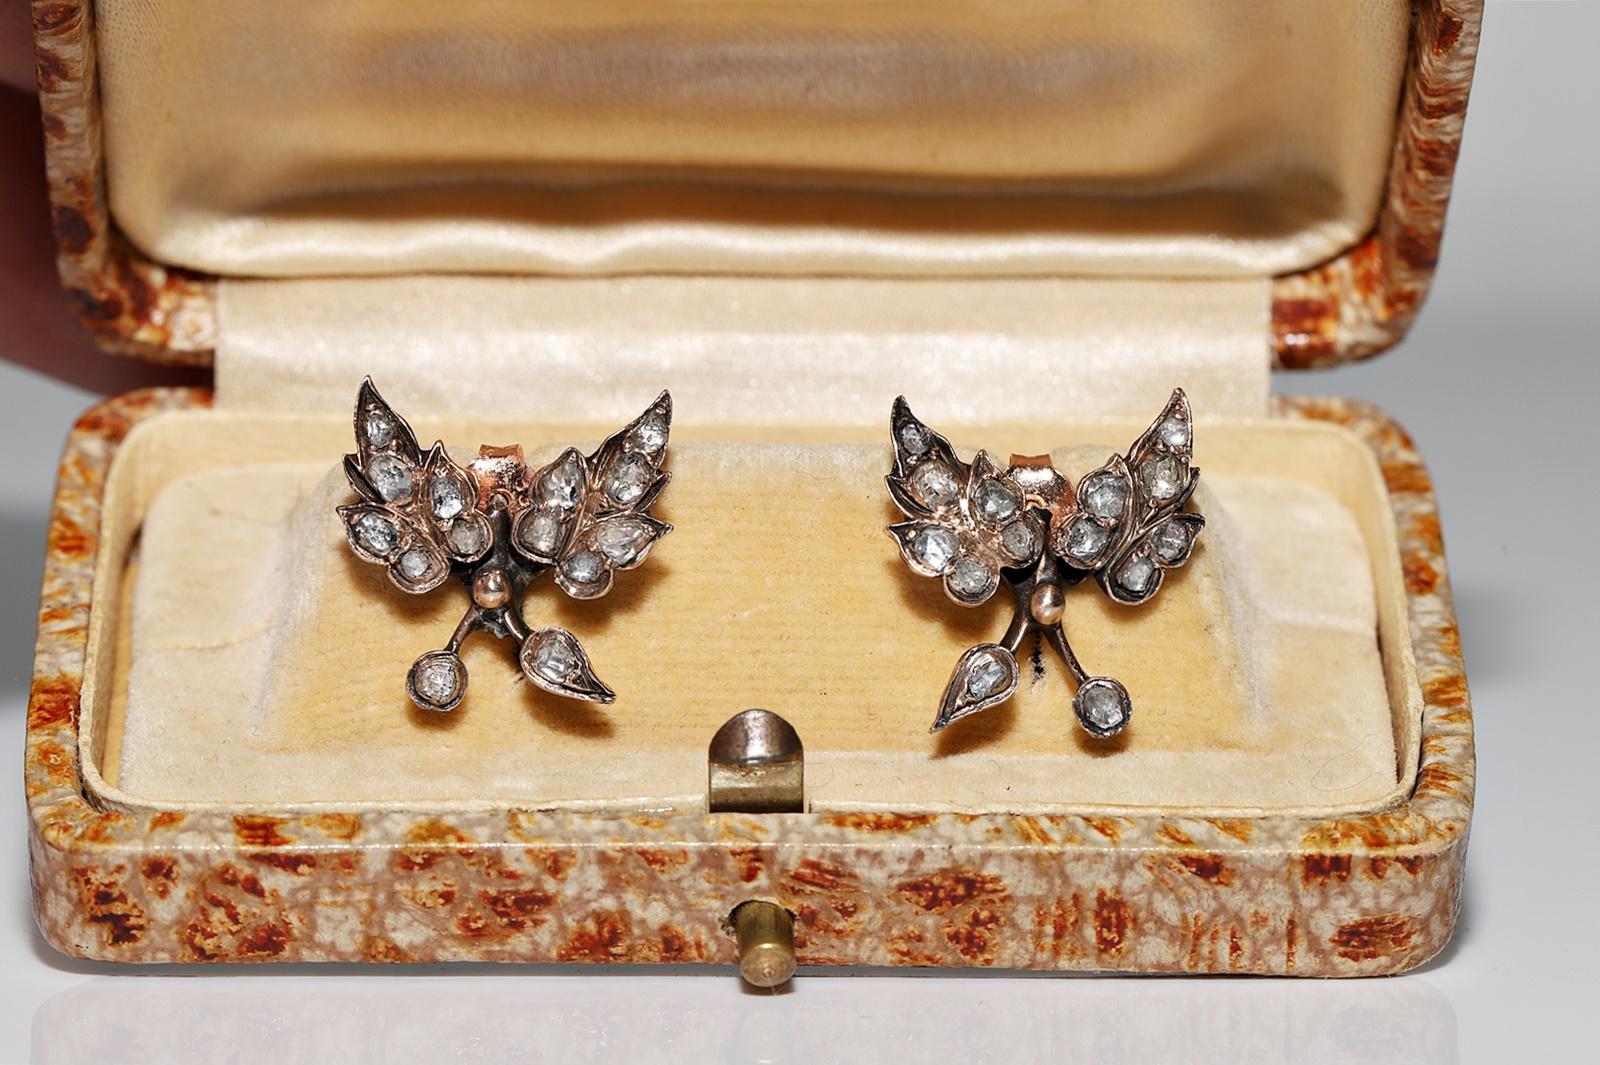 In very good condition.
Total weight is 3.7 grams.
Totally is diamond 0.80 ct.
The diamond is has H-I-J-K-L color and s1-s2-s3-Pique 1 clarity.
Acid tested to be 8k real gold.
Box is not included.
The back lock part of the earring has been